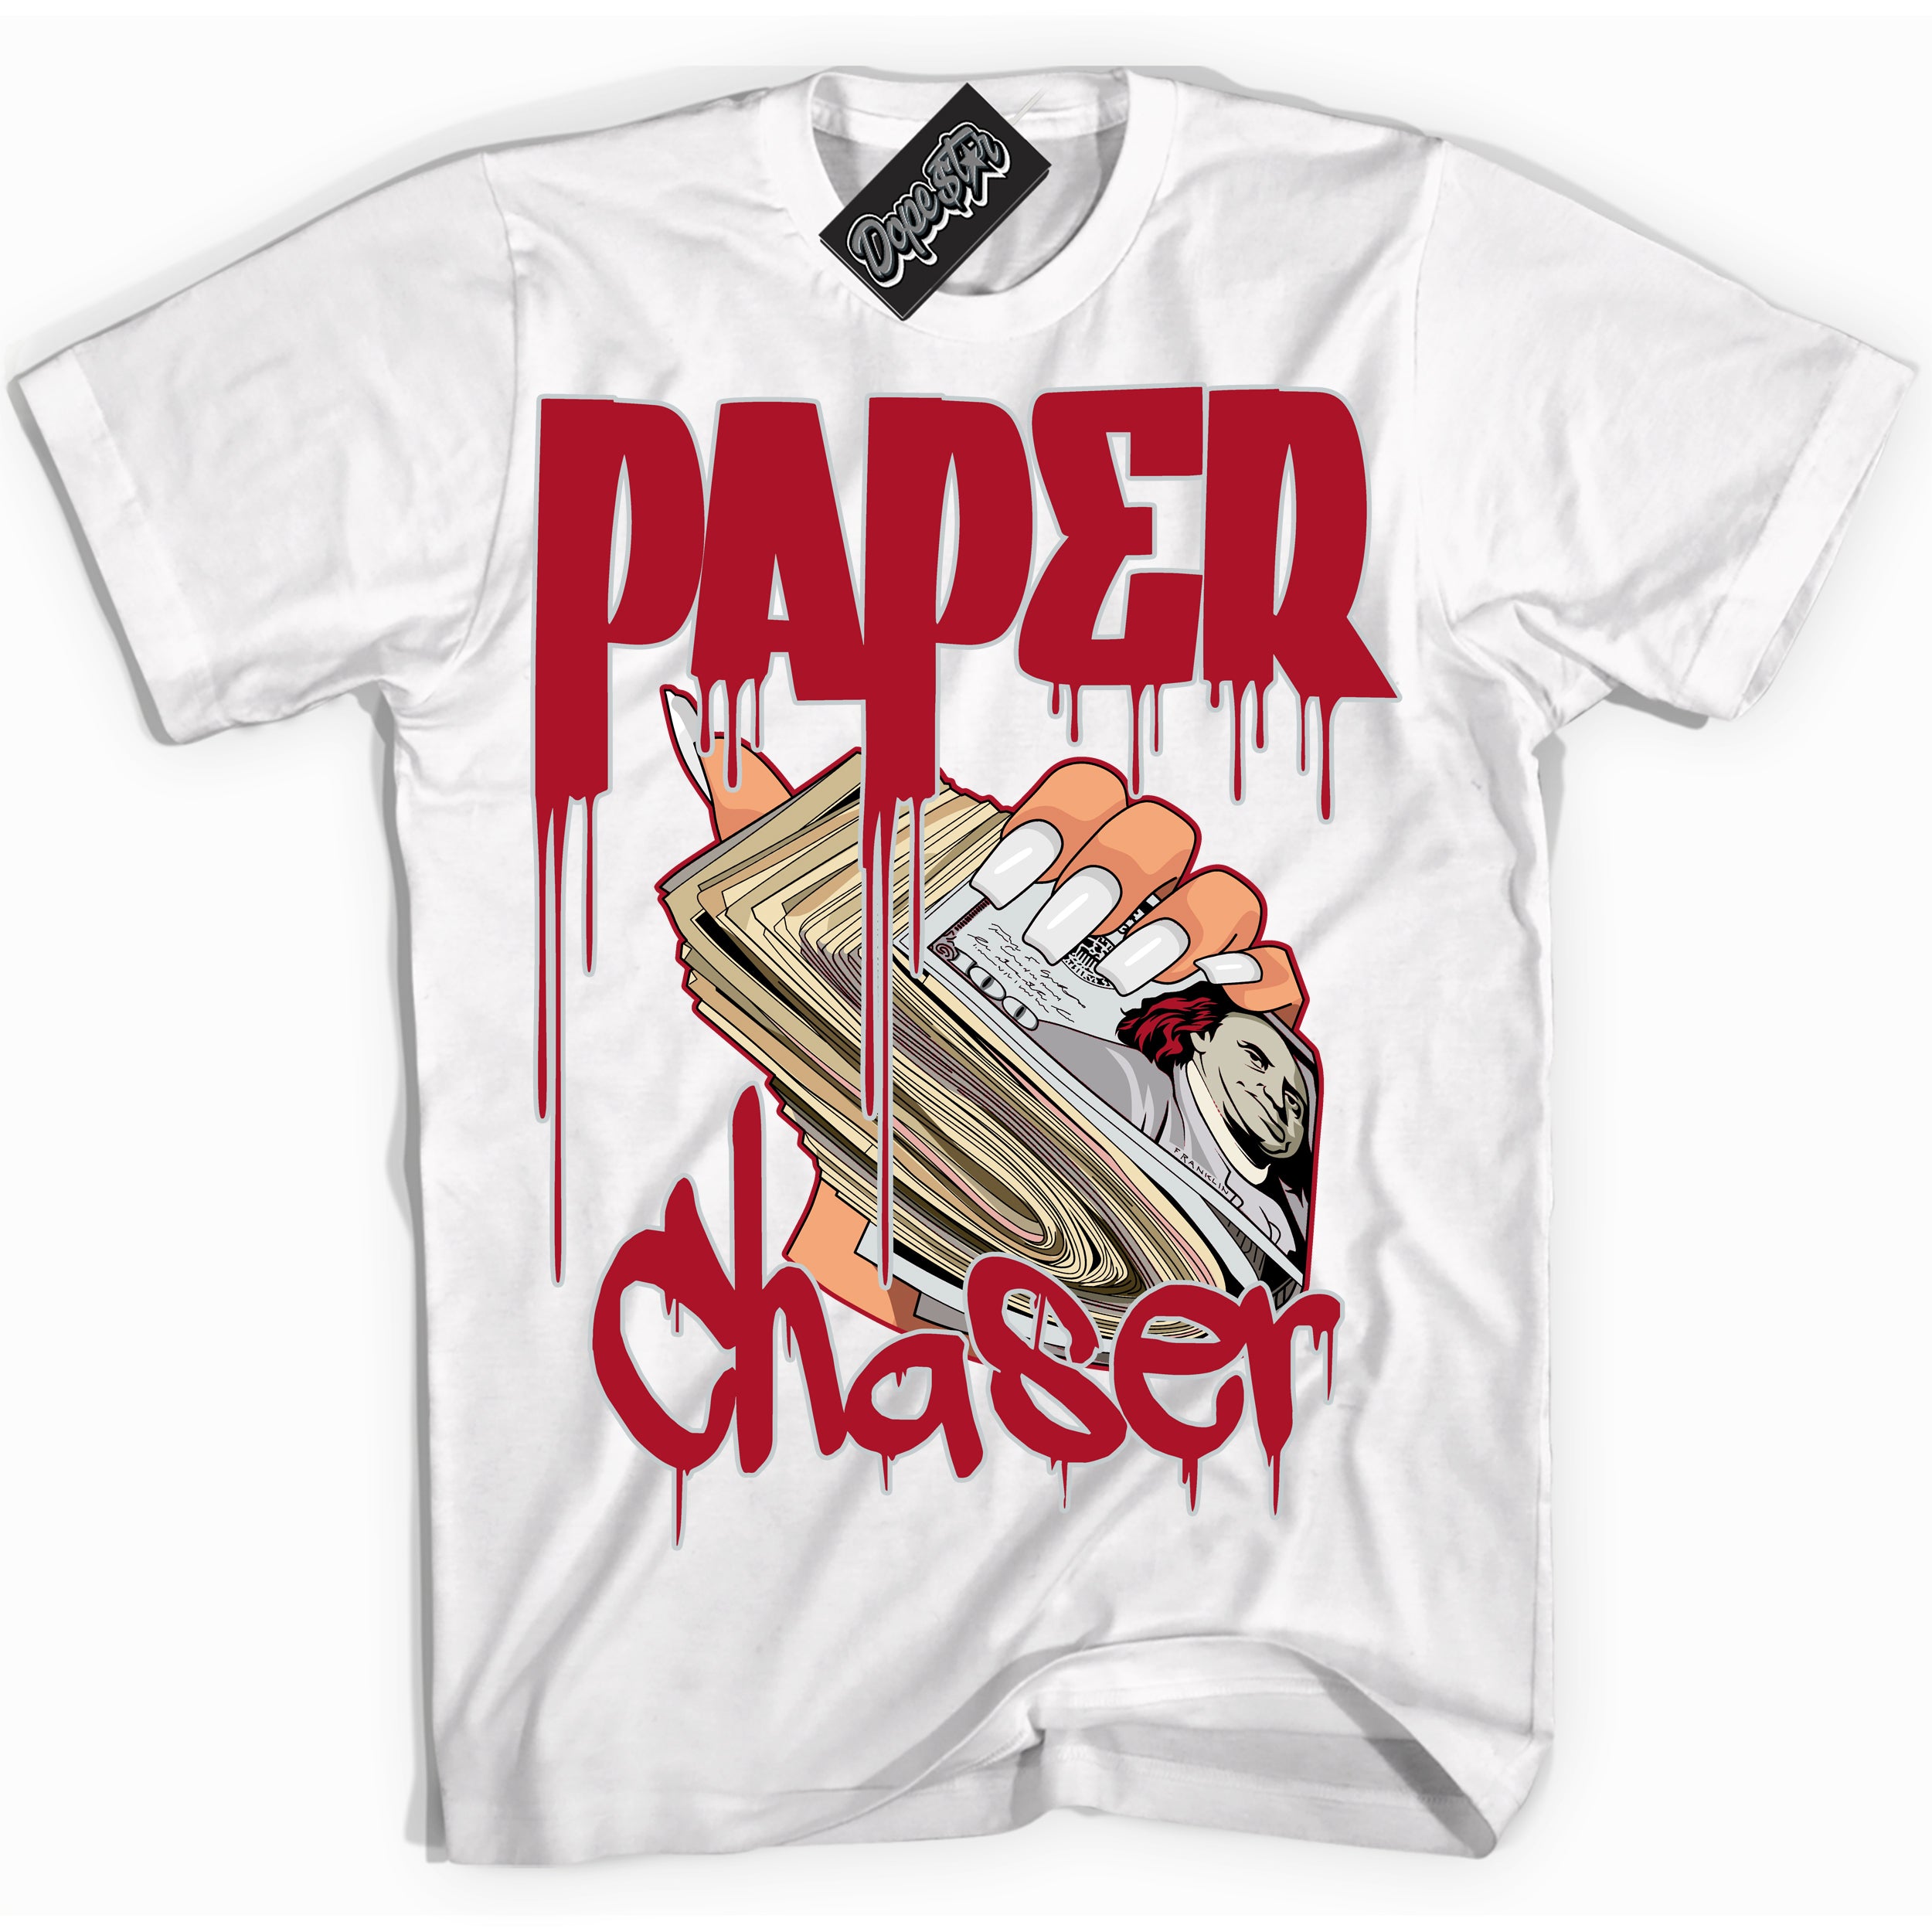 Cool White Shirt with “ Paper Chaser ” design that perfectly matches Reverse Ultraman Sneakers.